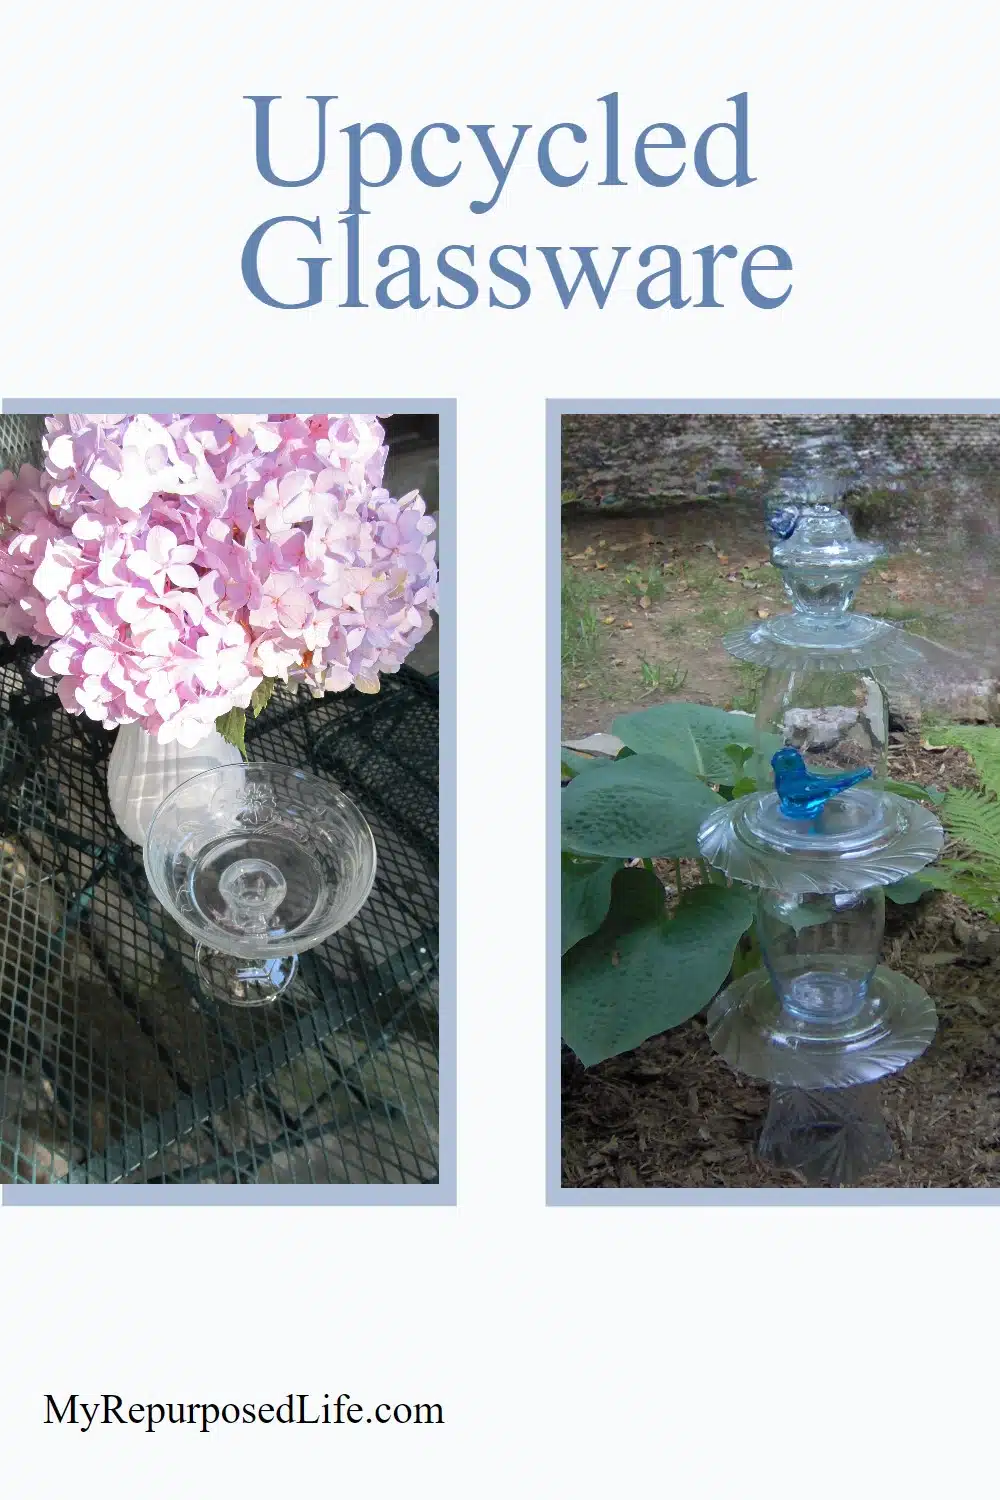 Collecting glassware can be addictive! But, it's a lot of fun and can be very rewarding when you have a lot of unique pieces to choose from when you make your repurposed glass totems. It really is a great way to upcycle all those glass vases you may already have on hand. #MyRepurposedLife #repurposed #glassware #garden #totem #upcycled via @repurposedlife